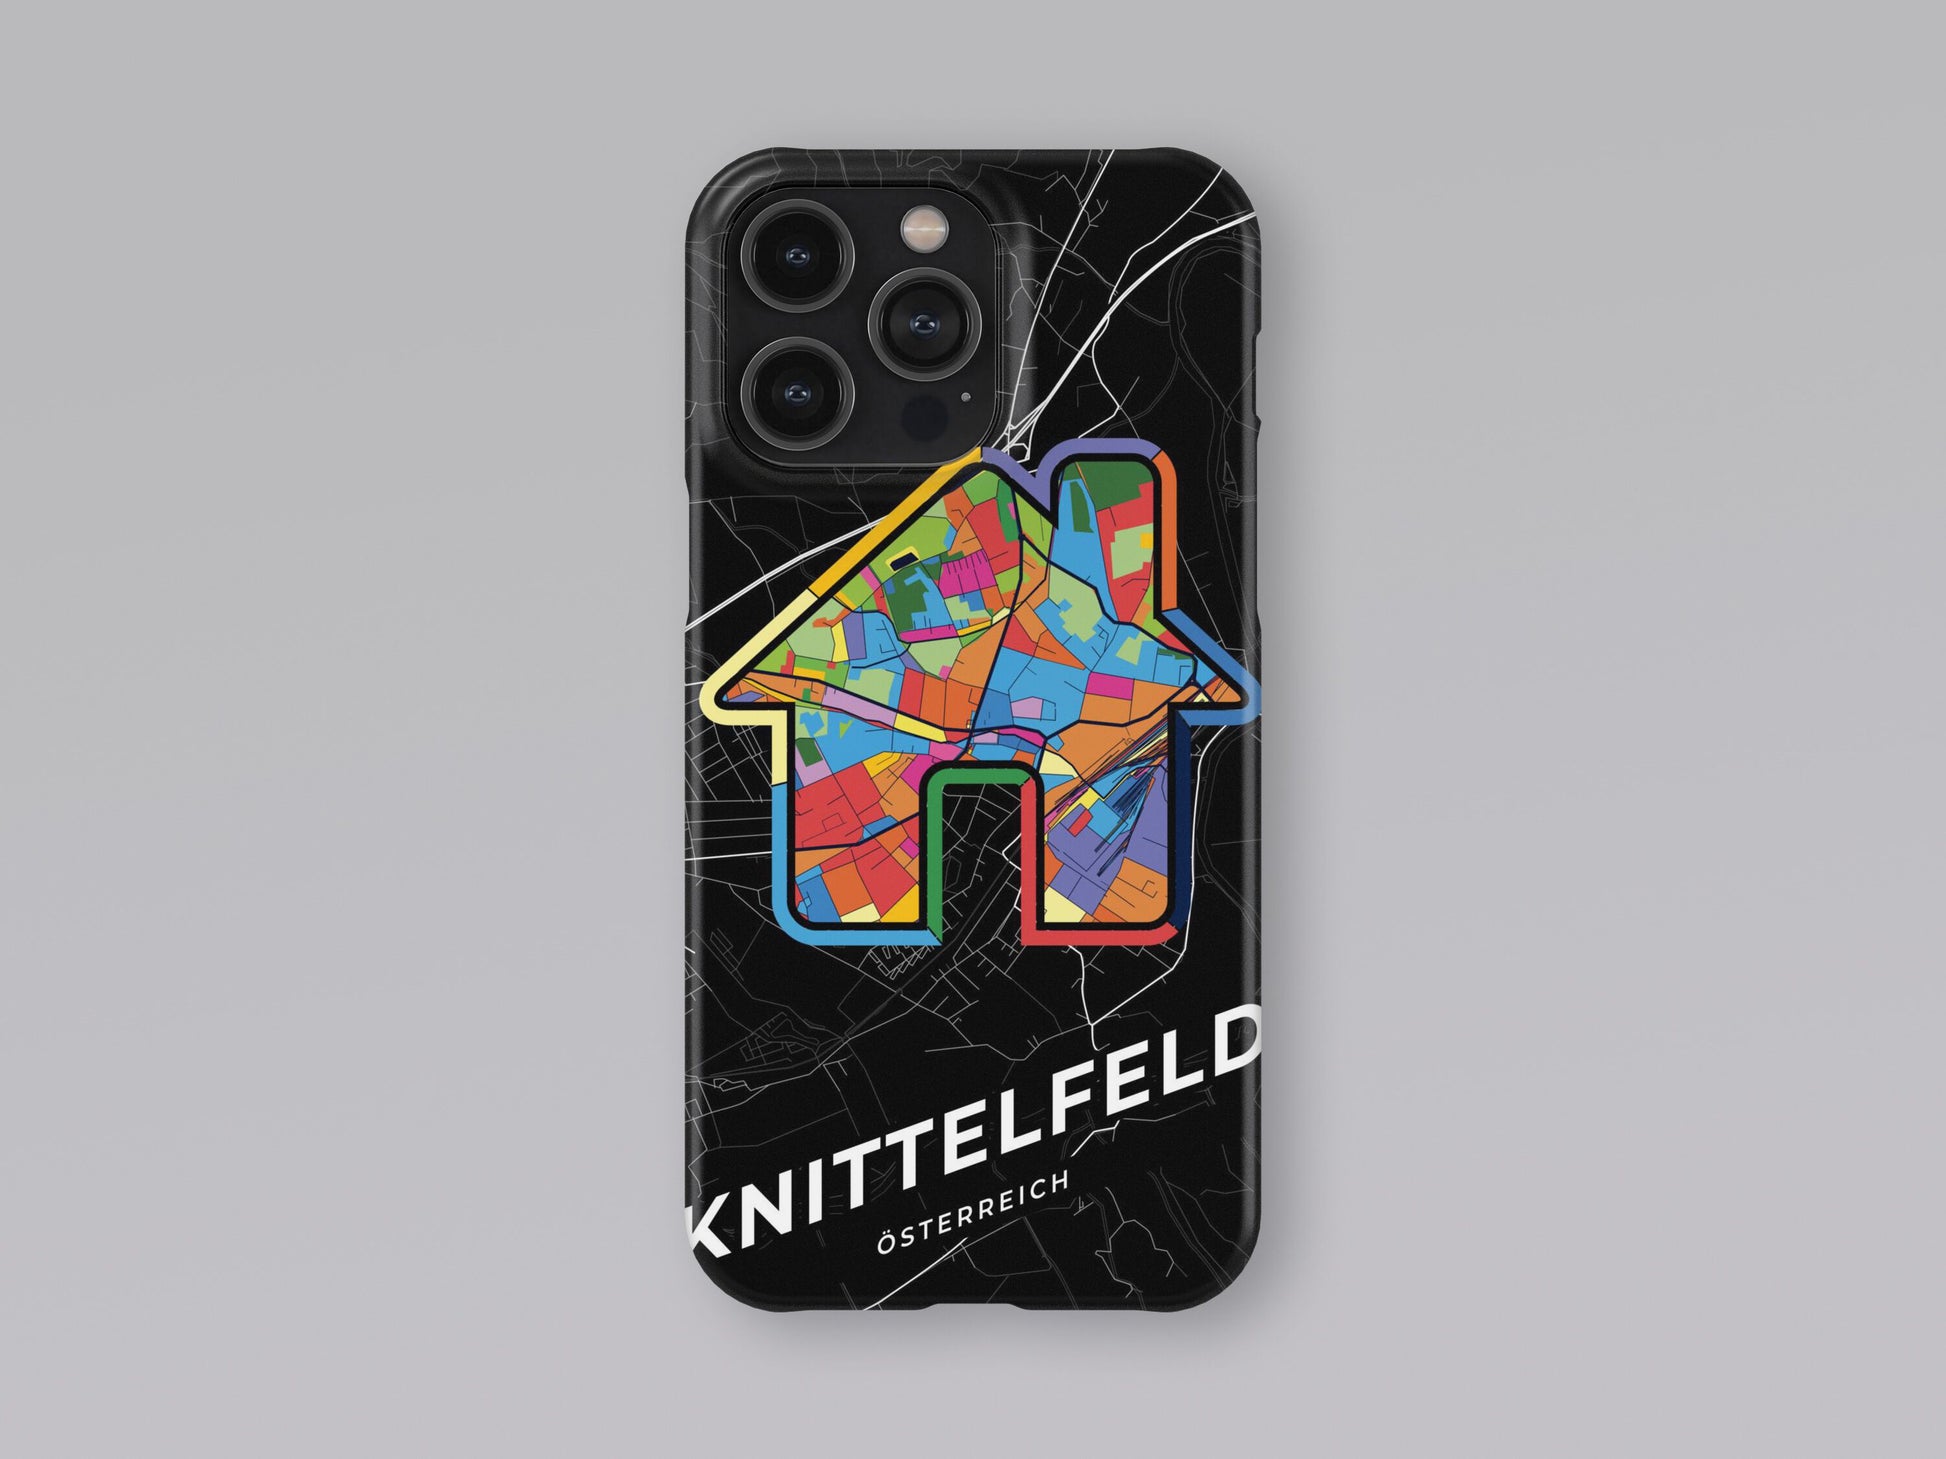 Knittelfeld Österreich slim phone case with colorful icon. Birthday, wedding or housewarming gift. Couple match cases. 3